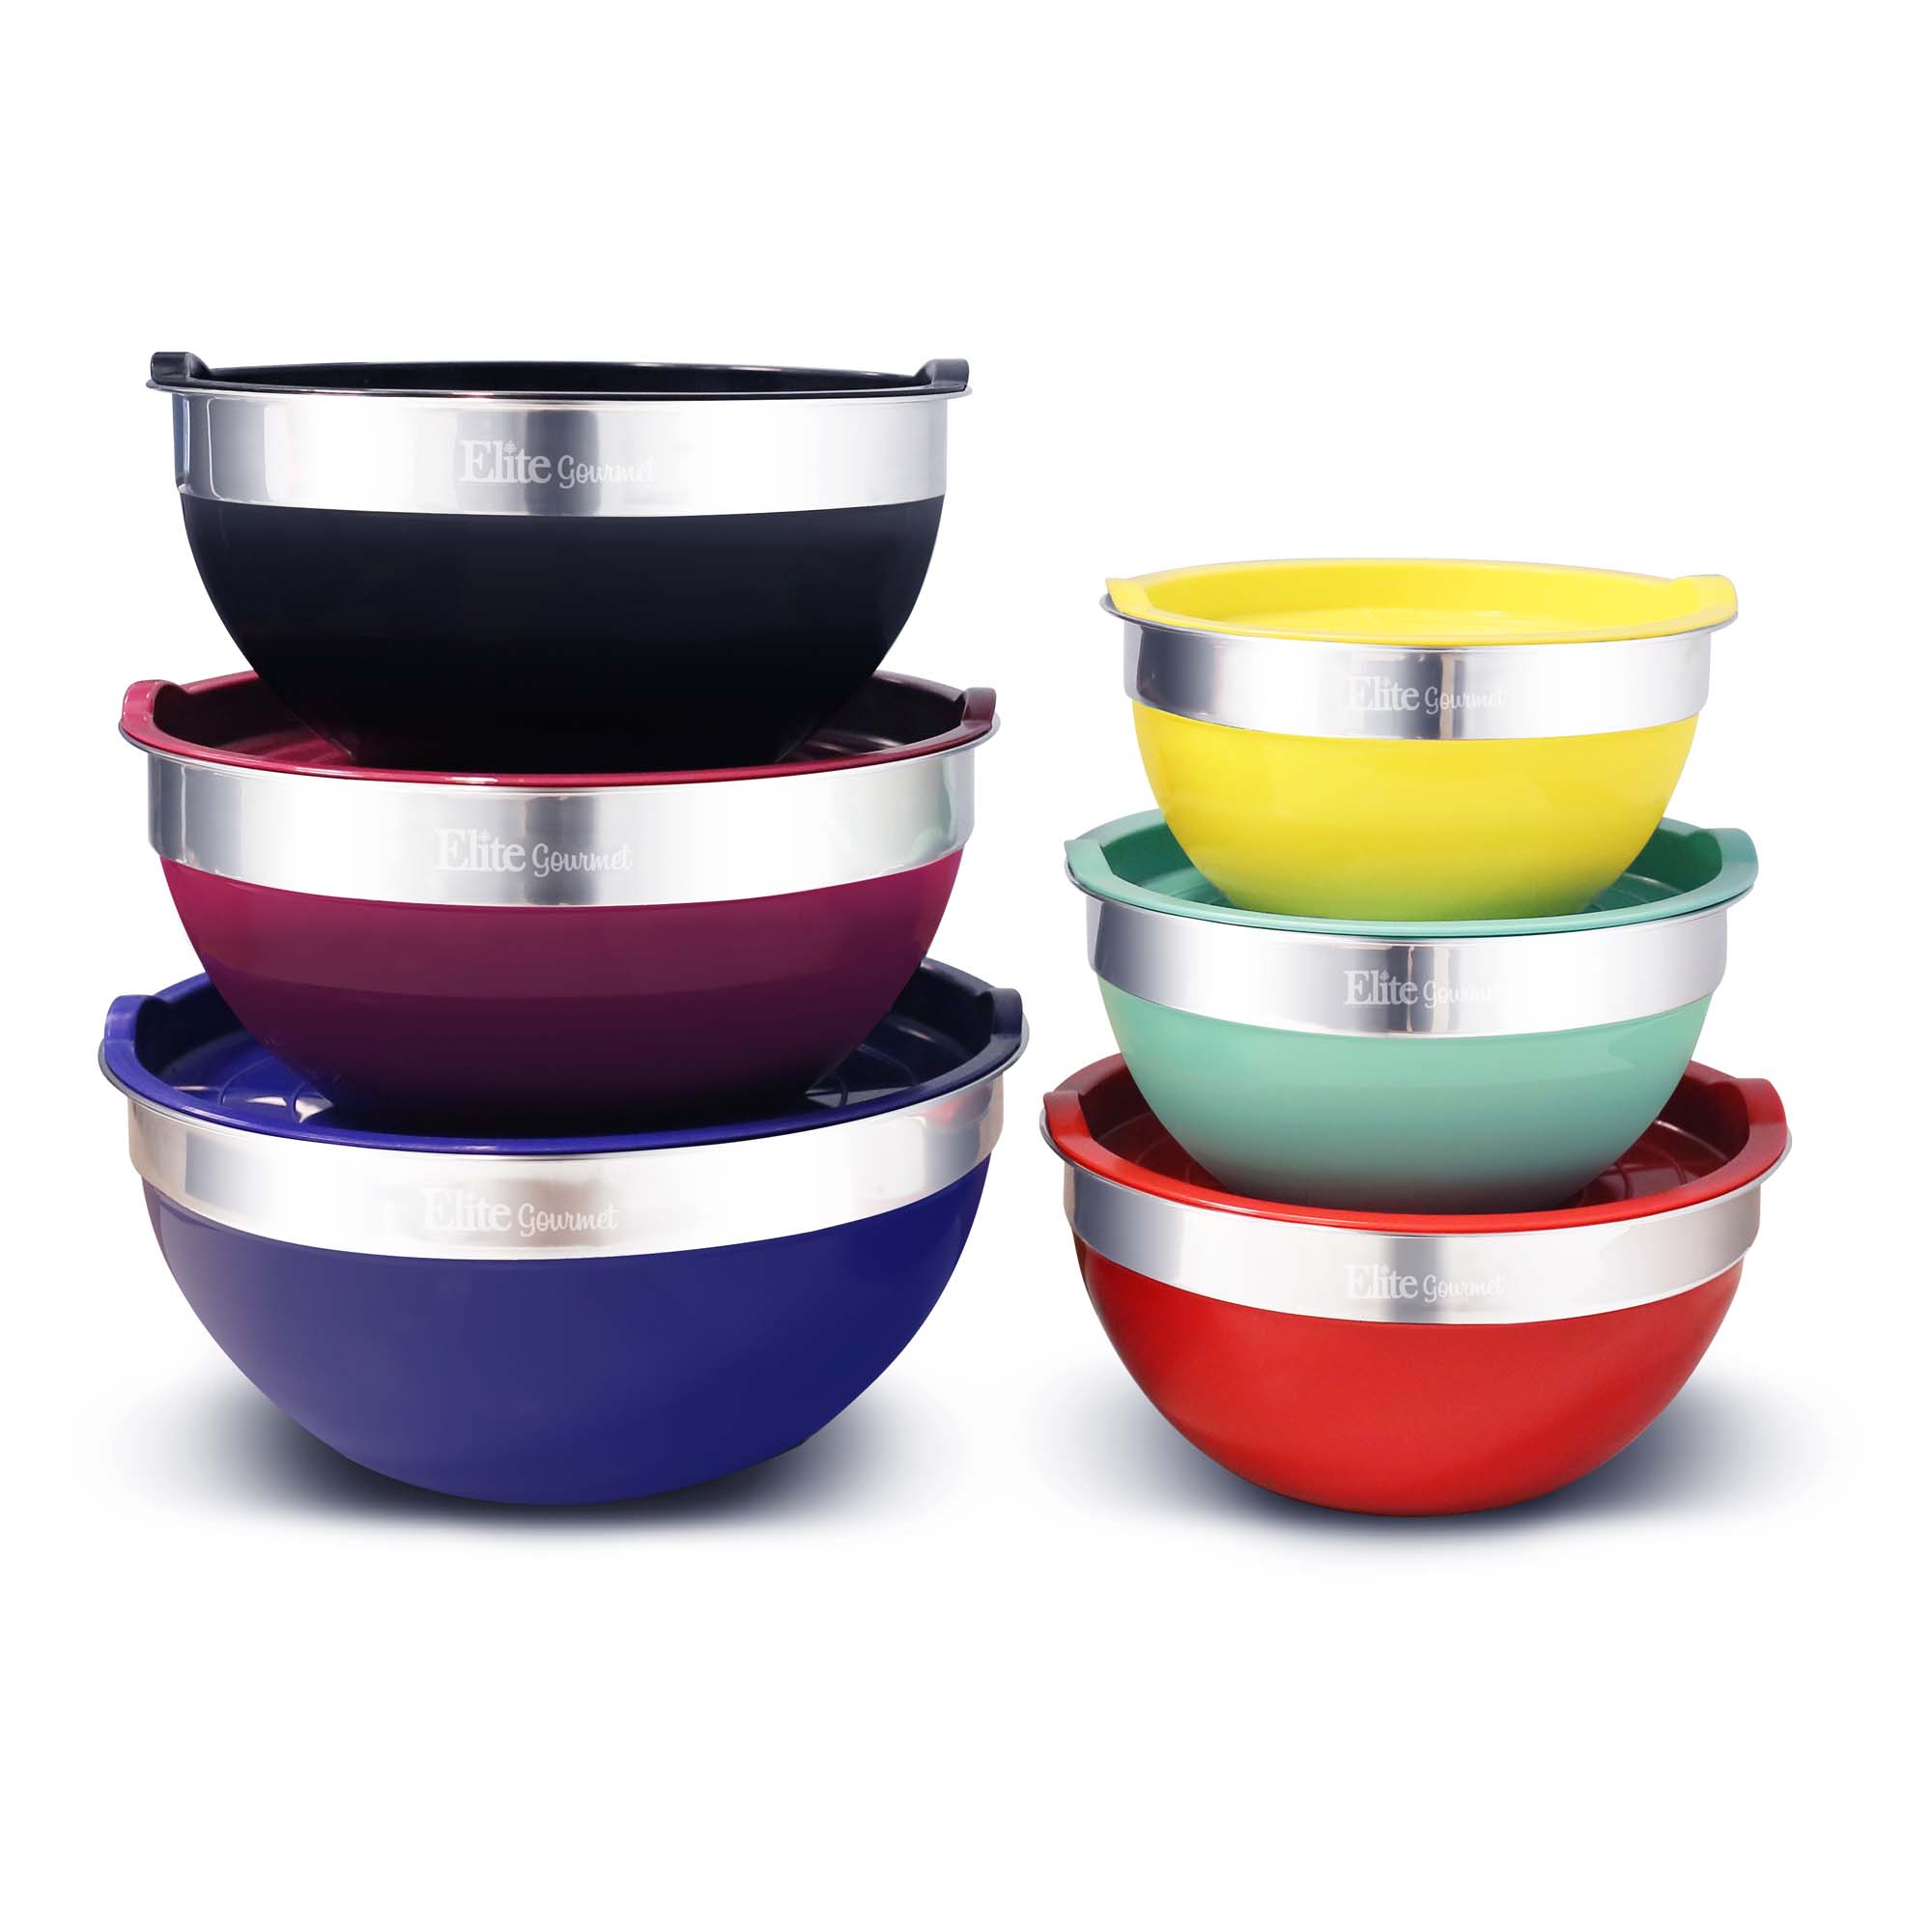 EBS-0012 Elite Gourmet 12PC Colored Mixing Bowl